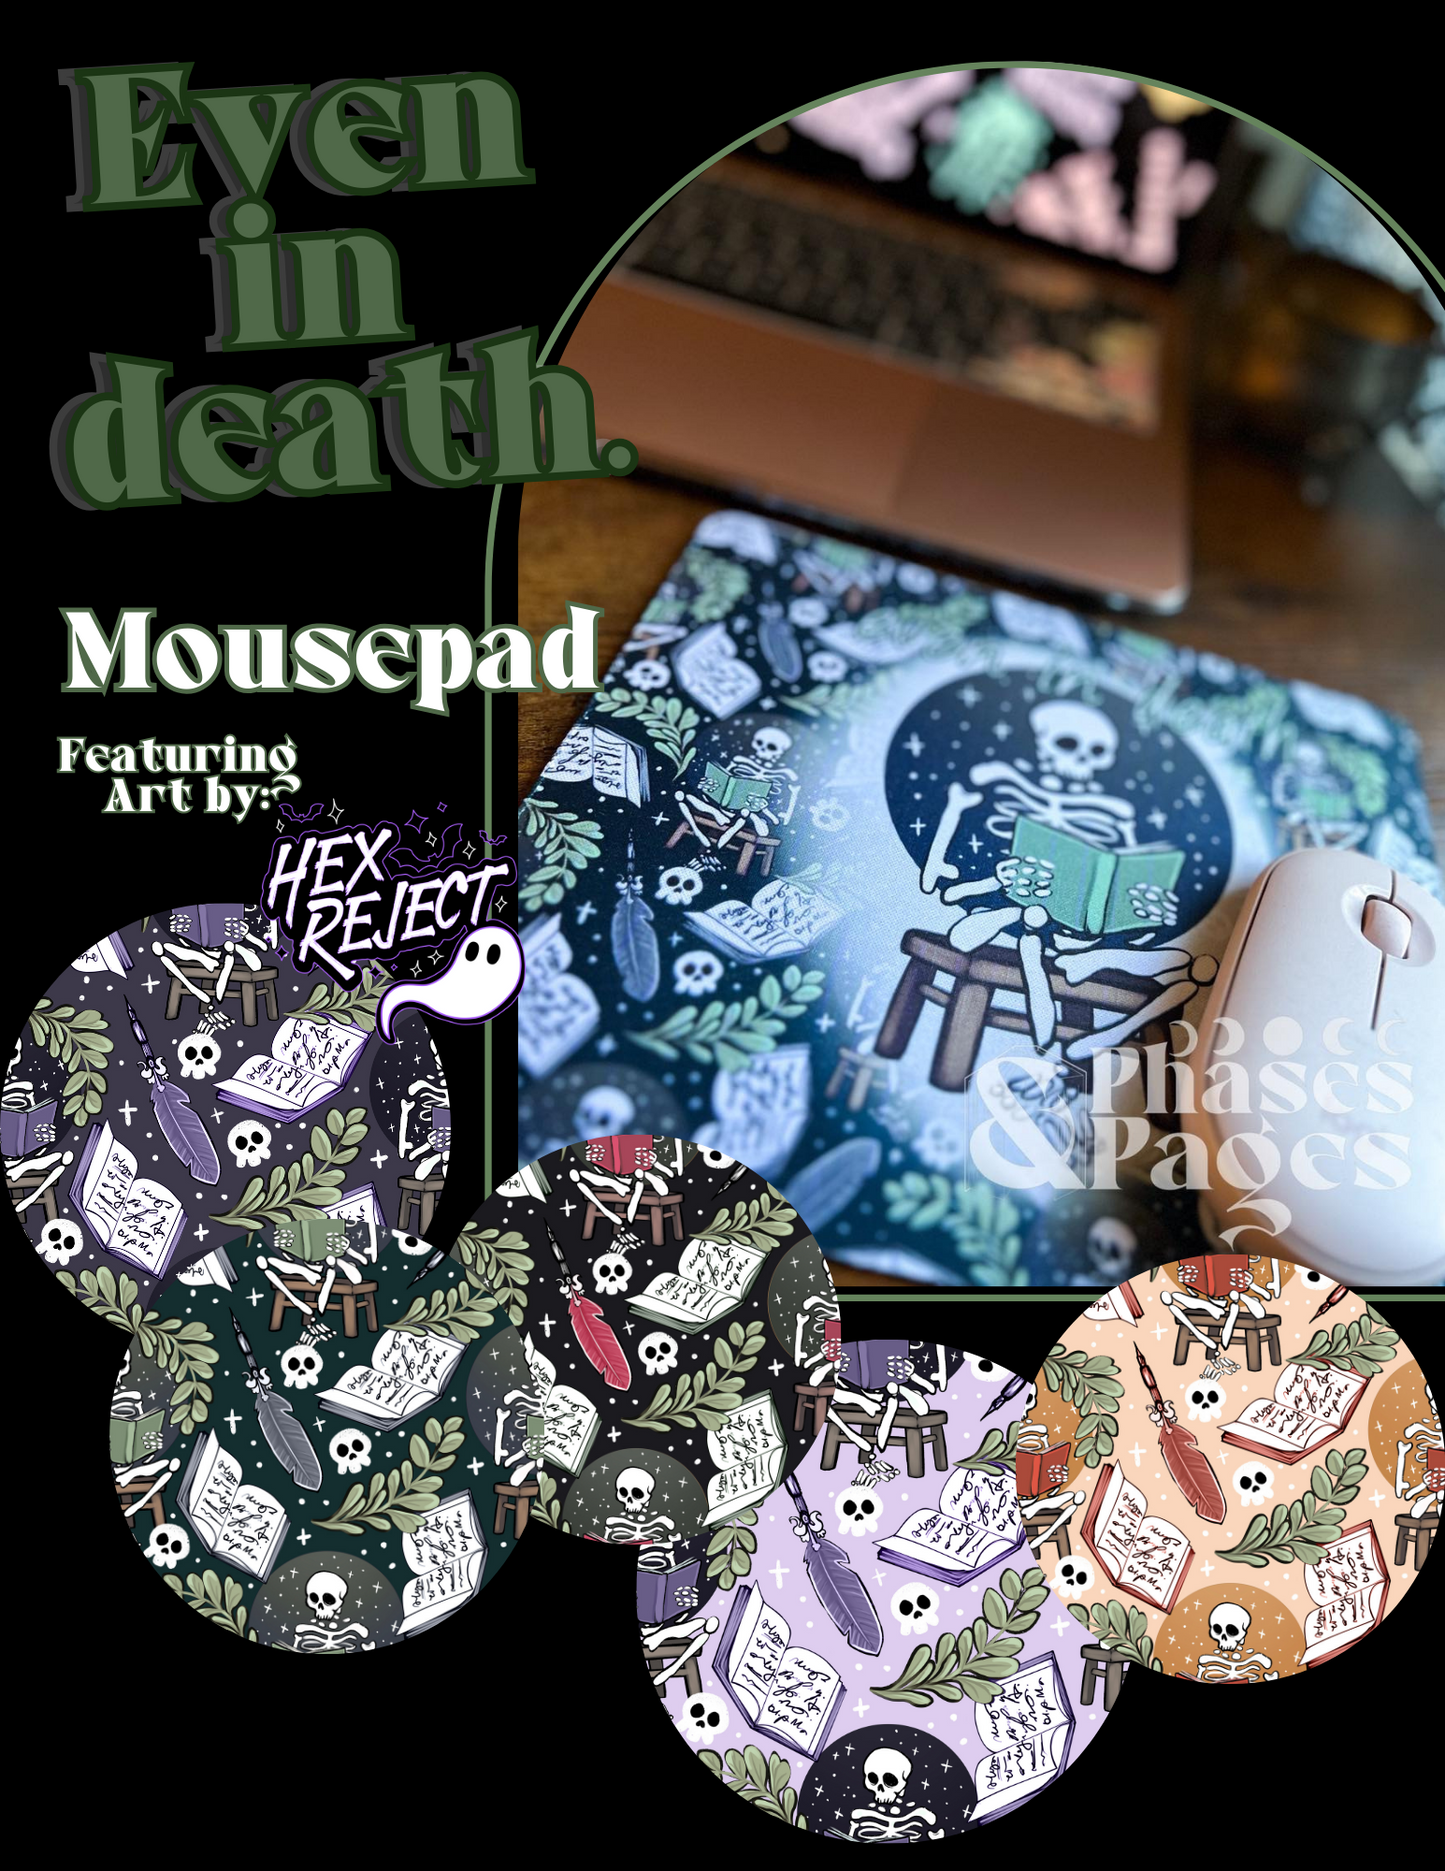 Even in death - Mousepad